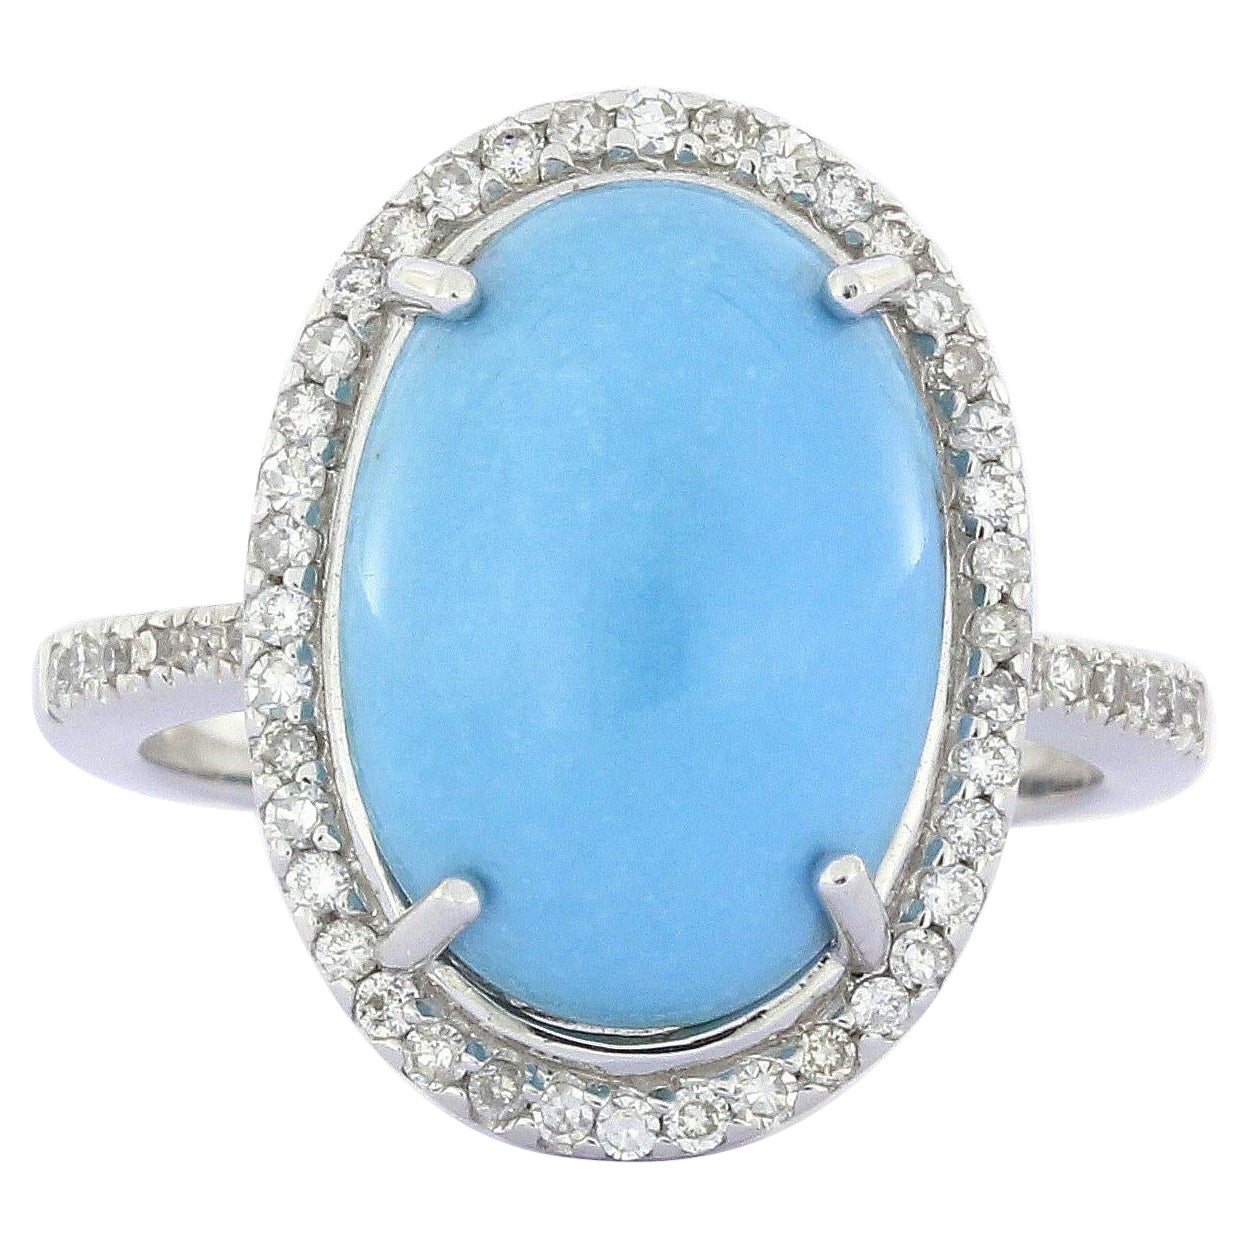 8.92 Carat Turquoise Diamond Cocktail Ring in White Gold